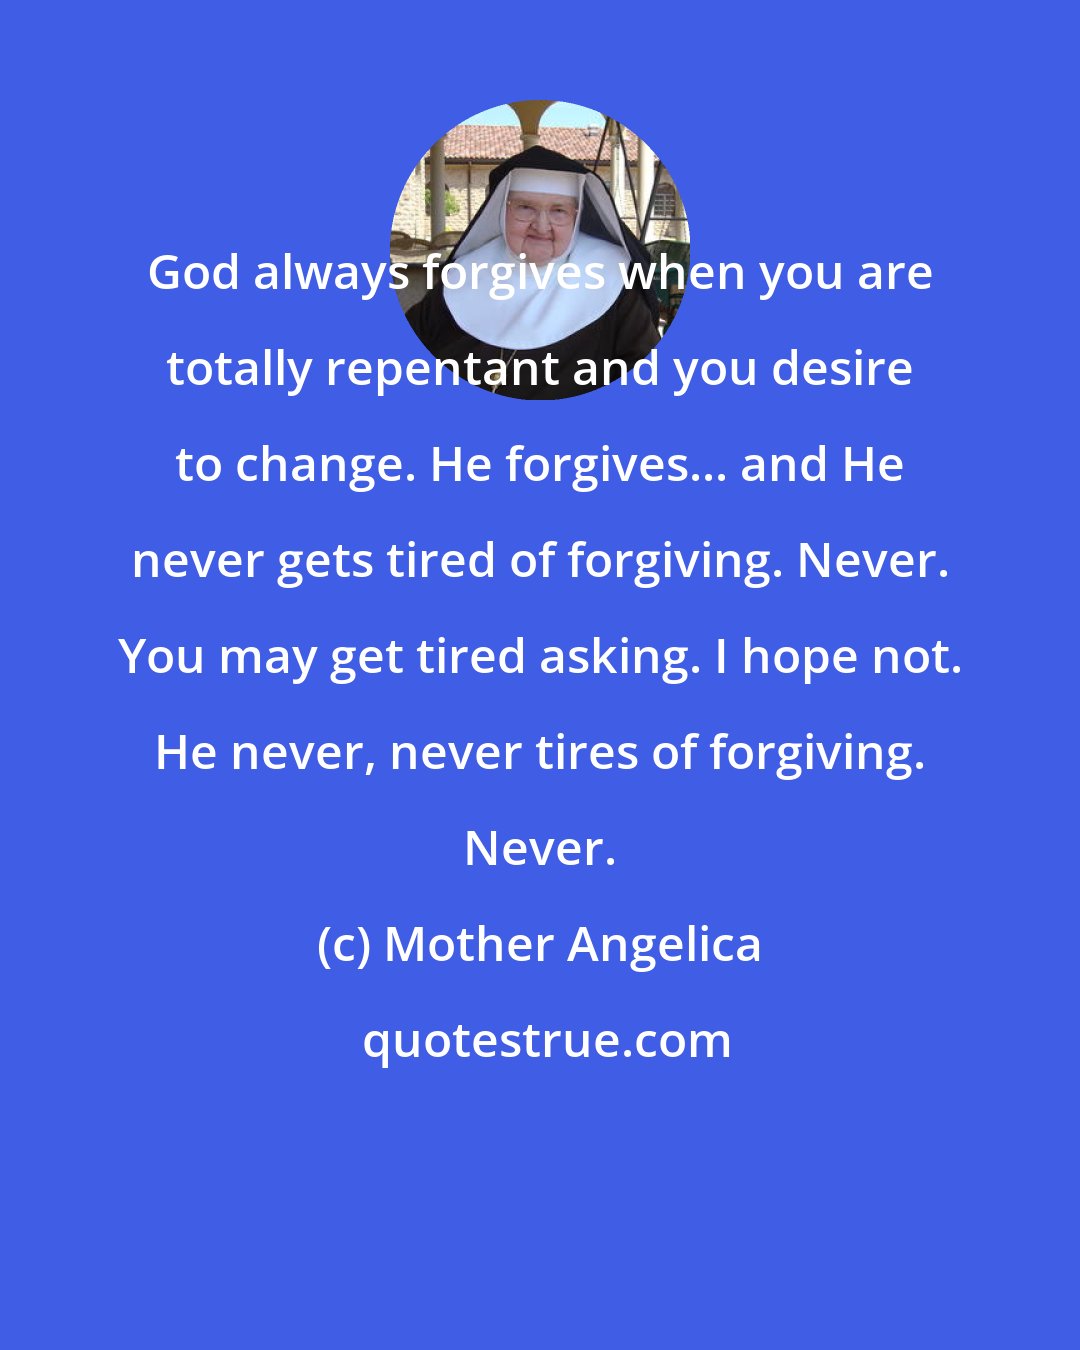 Mother Angelica: God always forgives when you are totally repentant and you desire to change. He forgives... and He never gets tired of forgiving. Never. You may get tired asking. I hope not. He never, never tires of forgiving. Never.